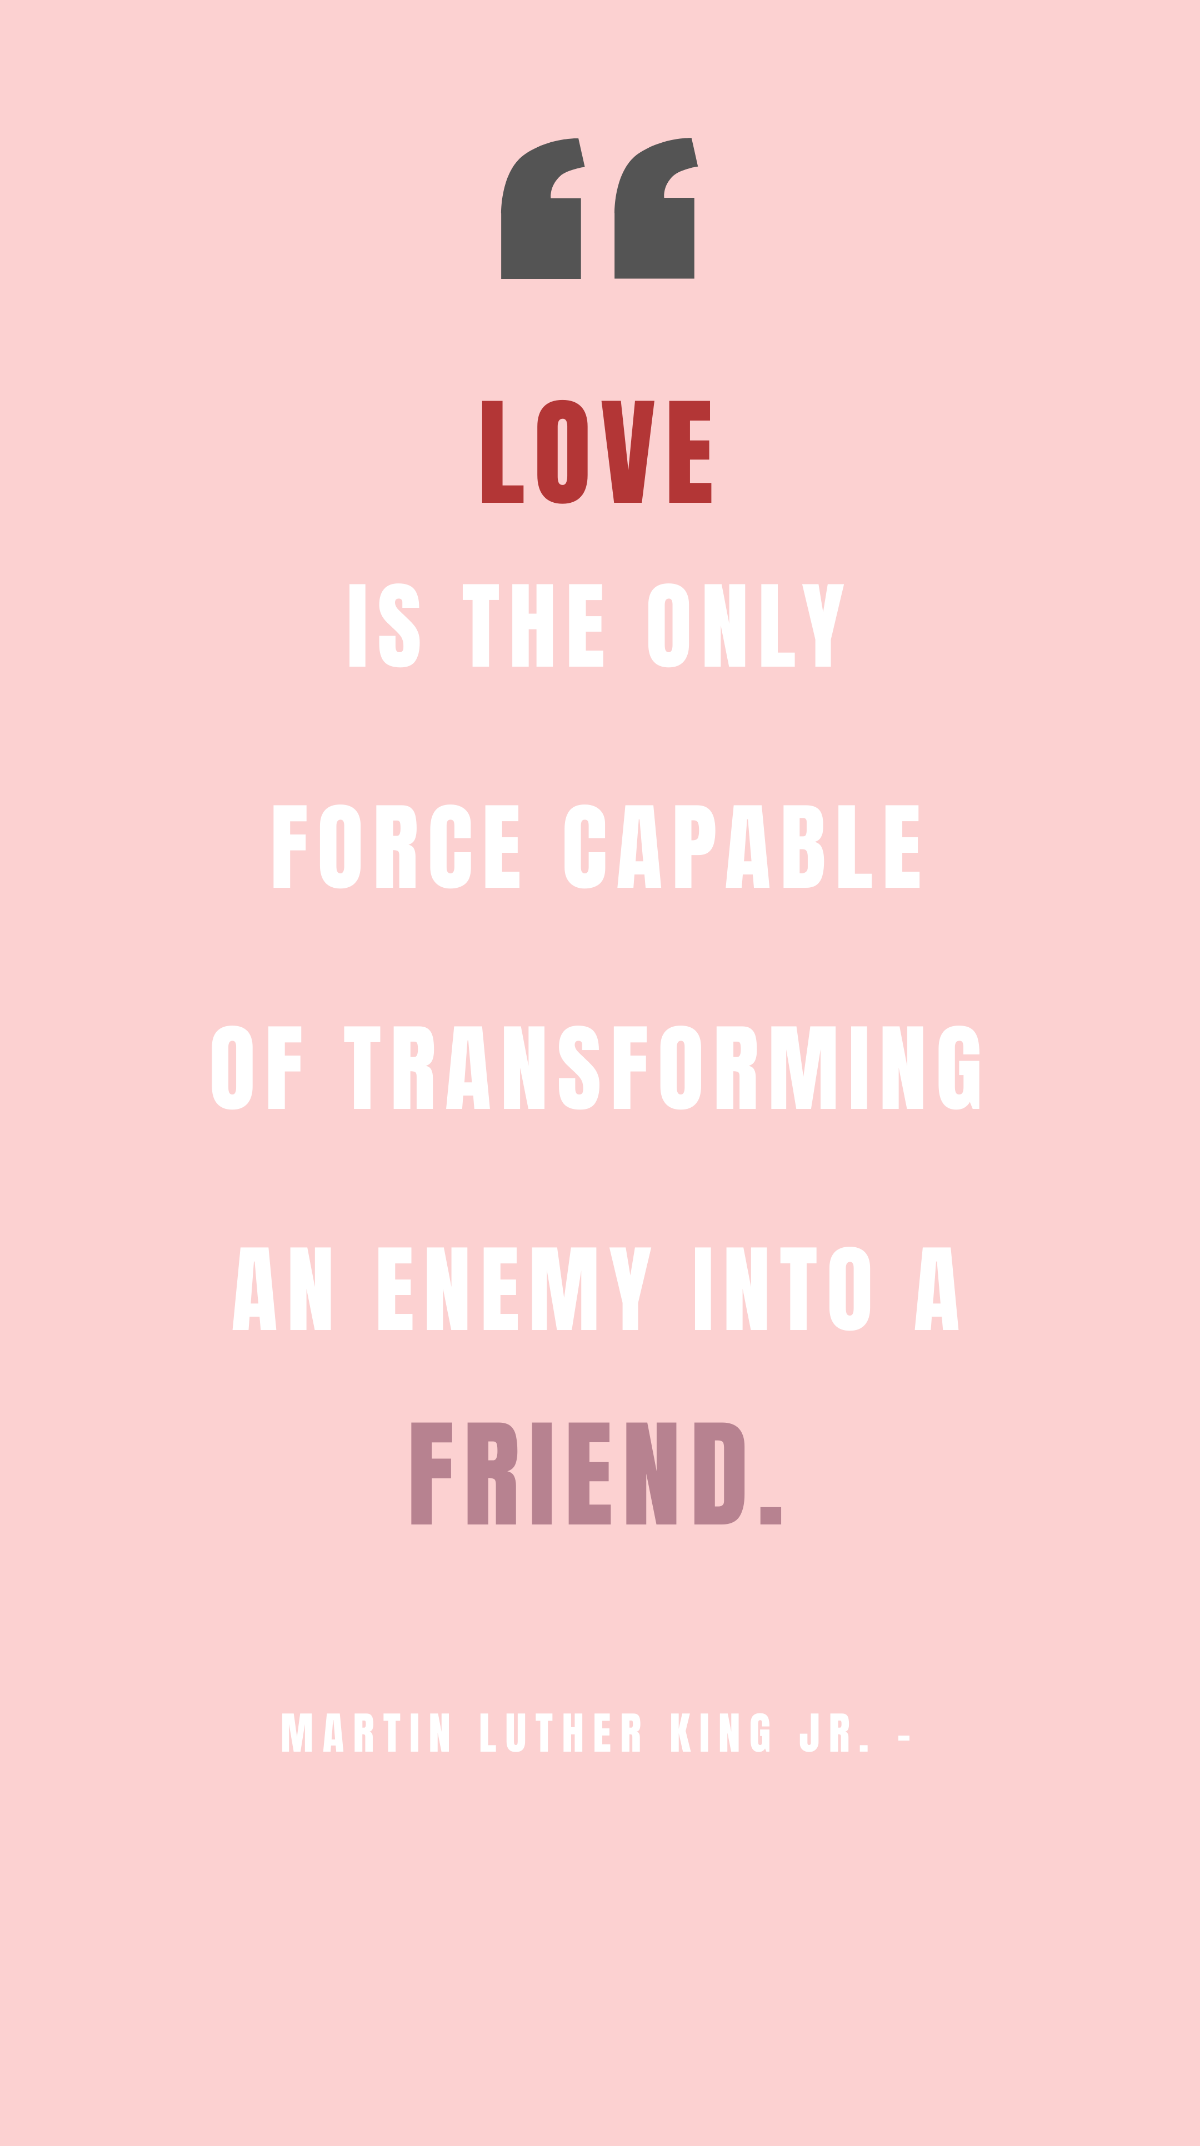 Martin Luther King Jr. - Love is the only force capable of transforming an enemy into a friend. Template